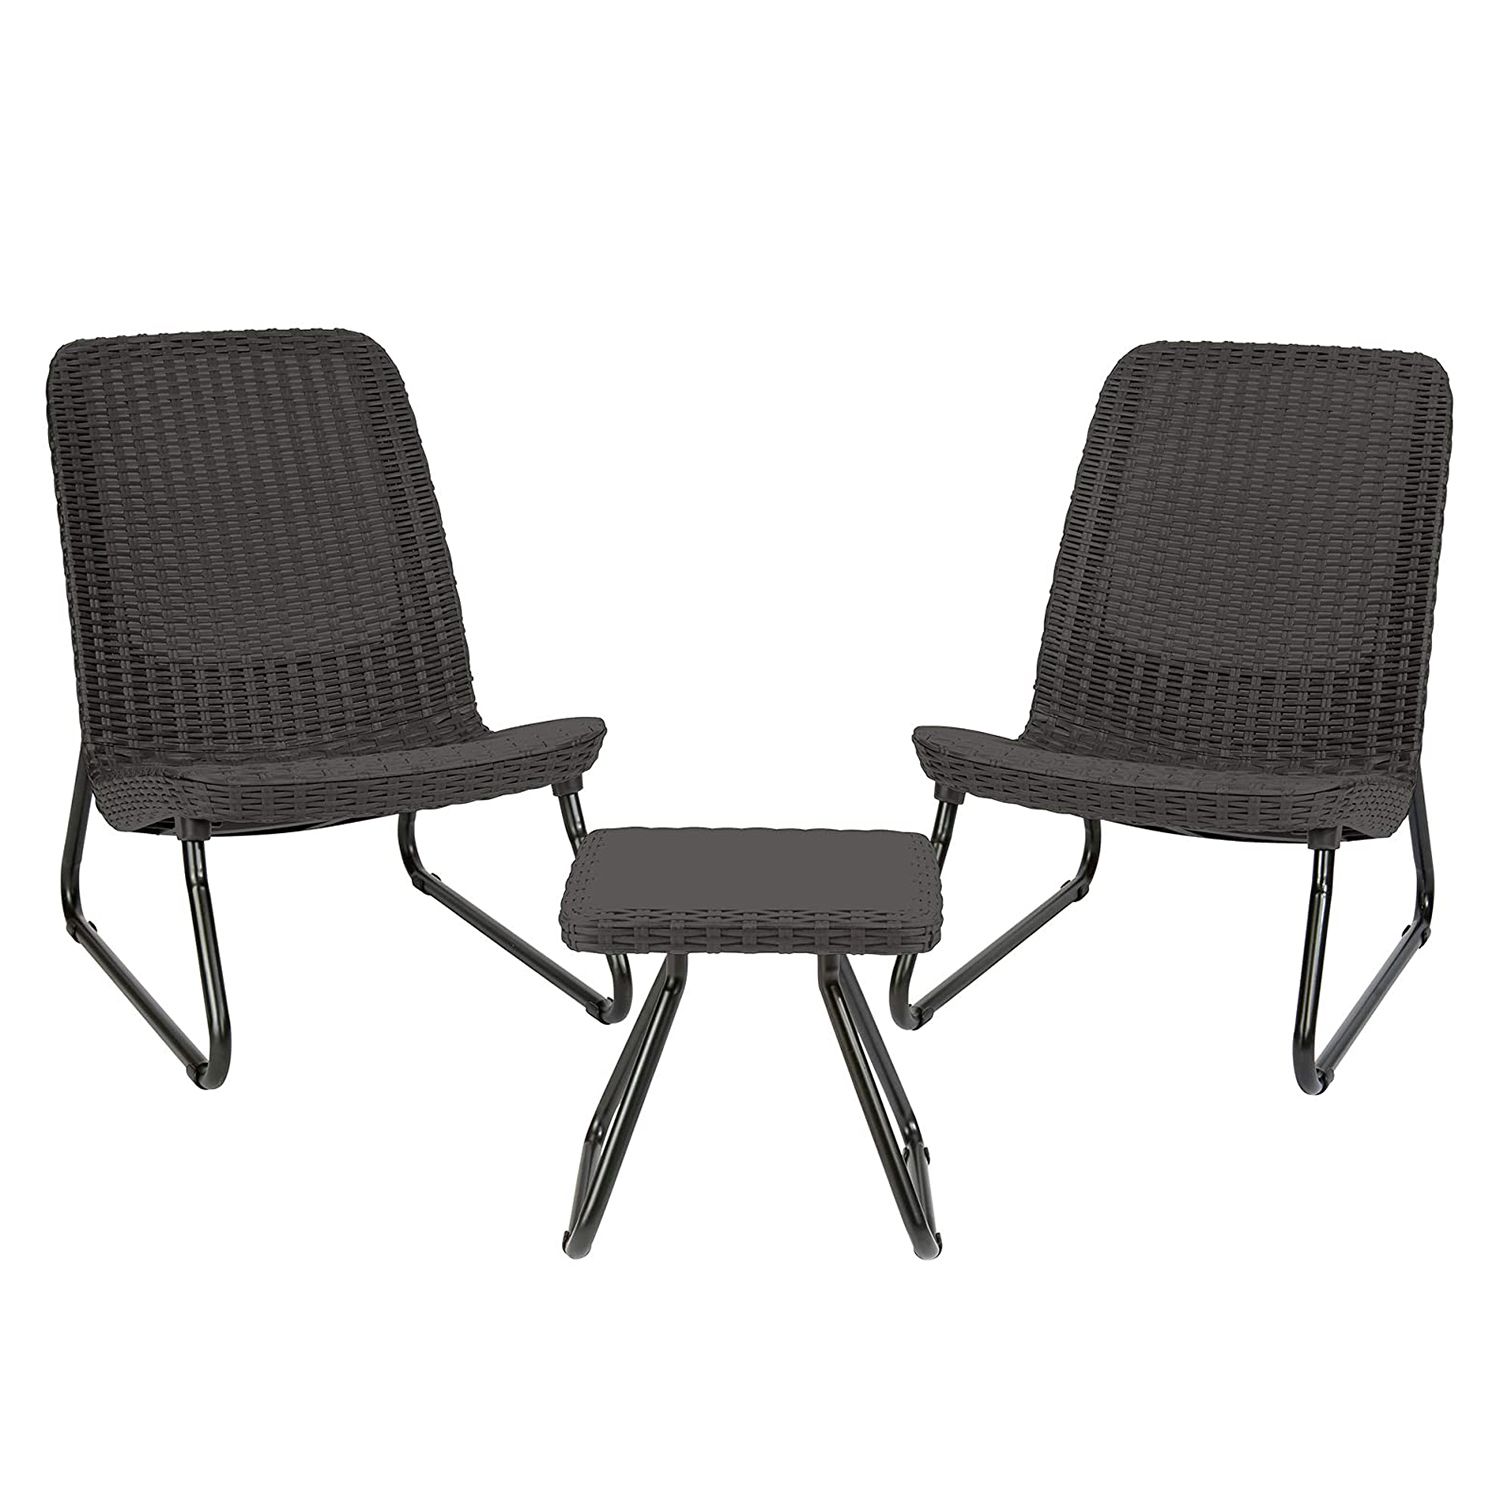 Roundup of Early Prime Day Patio Furniture Deals